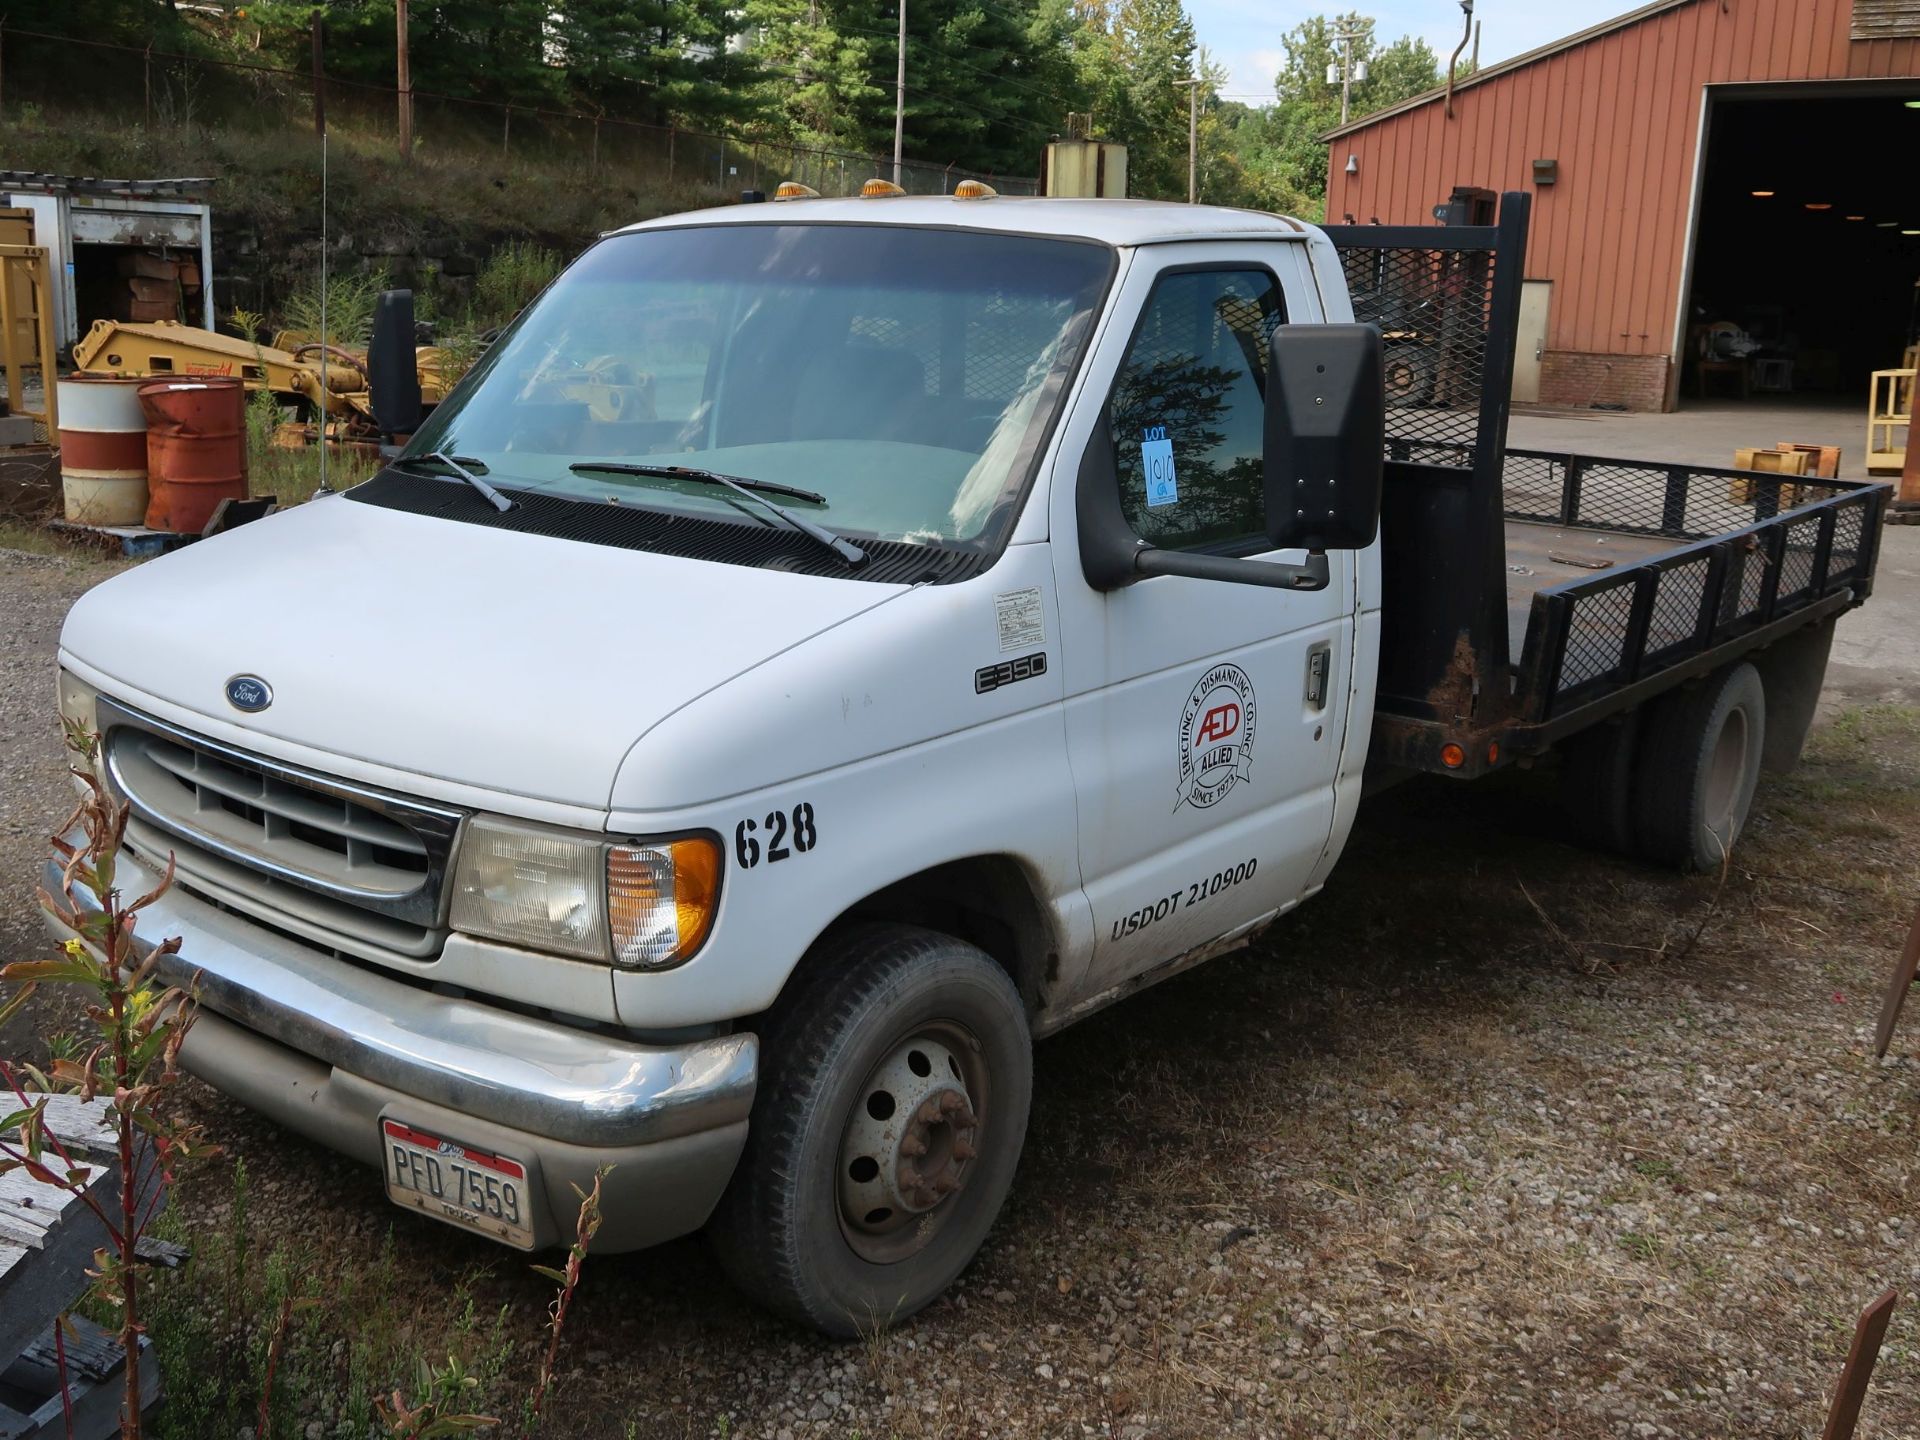 1998 FORD E350 STAKE BODY TRUCK; VIN 1FDWE30S4WHB24633, 15' STEEL BED, 135,835 MILES (UNIT 02-628) - Image 2 of 10